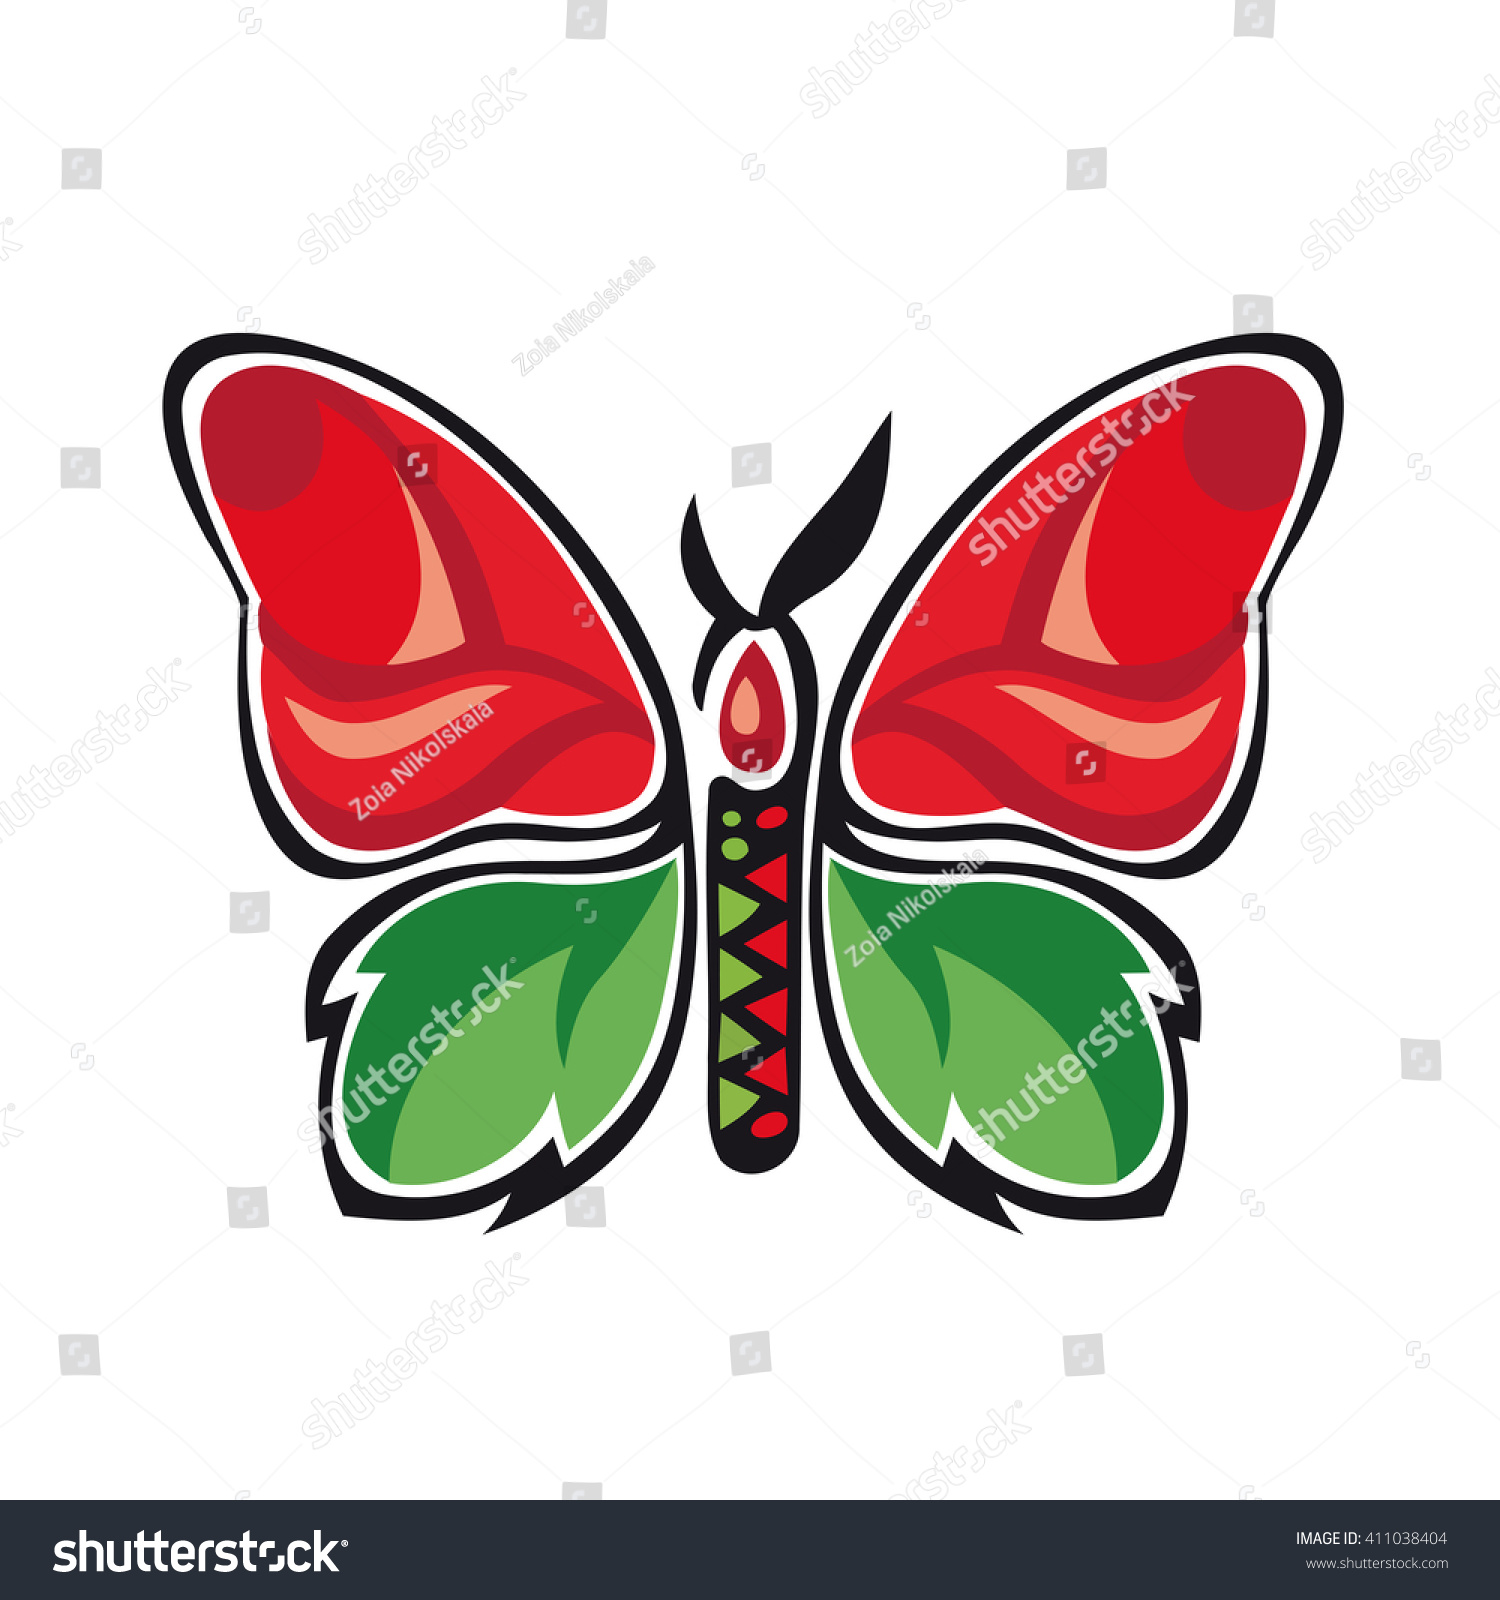 Download Butterfly Rose Vector Illustration Stock Vector 411038404 ...